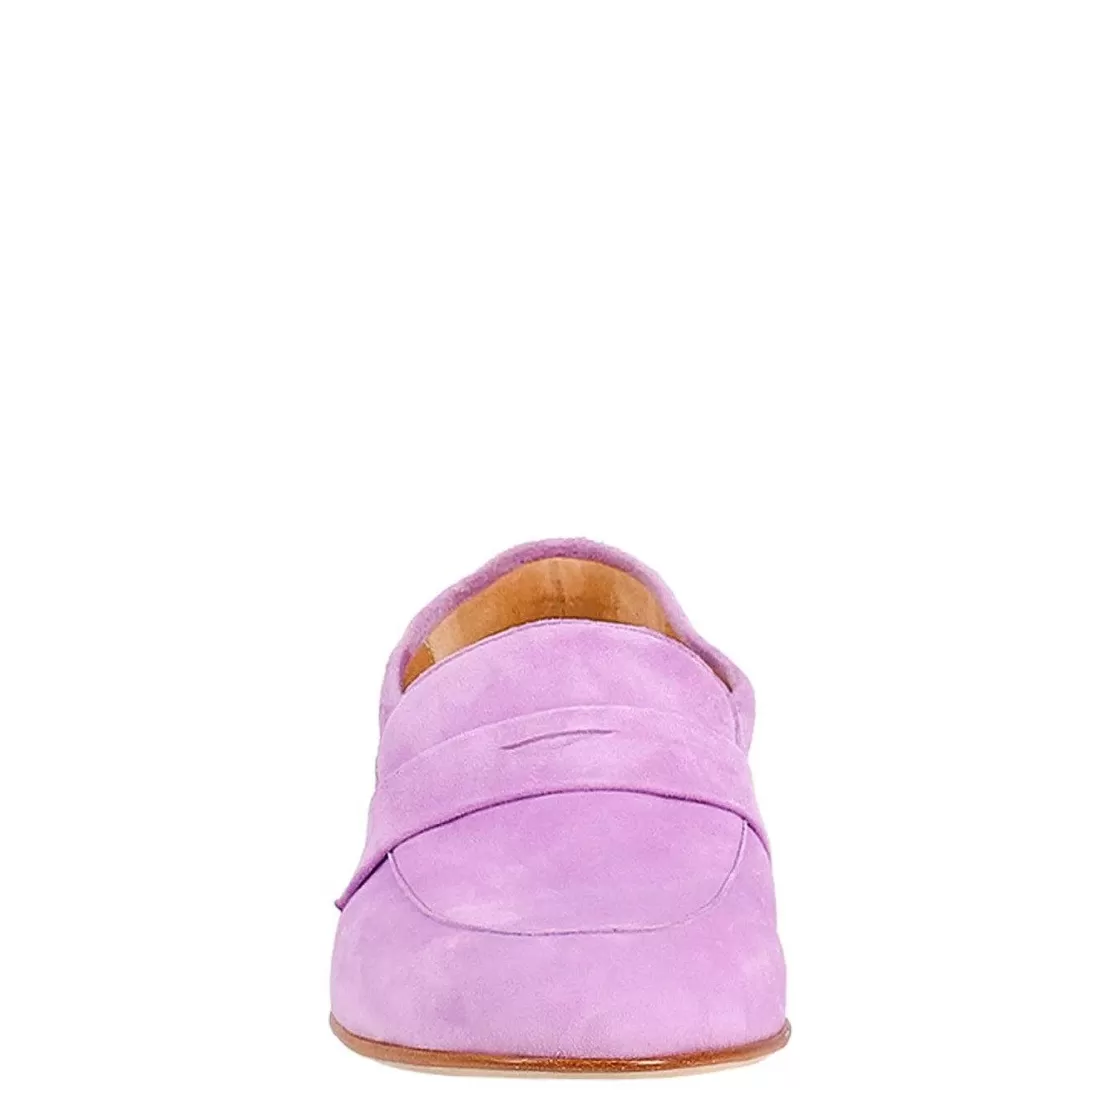 Leonardo Woman'S Bag Moccasin In Lilac Suede Clearance